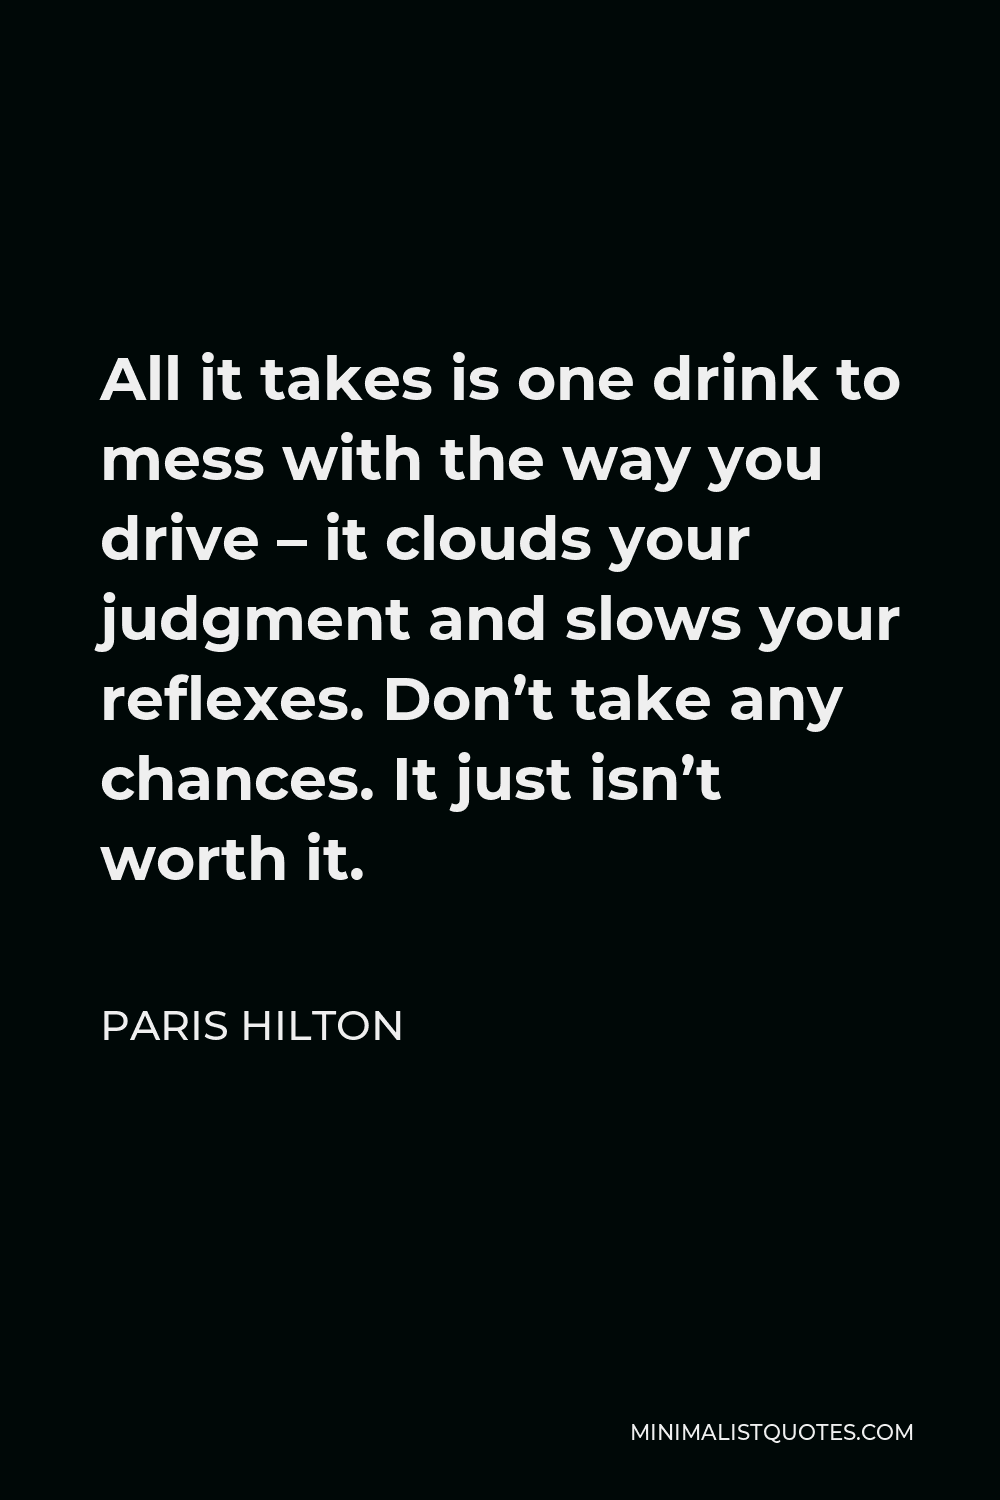 Paris Hilton Quote - All it takes is one drink to mess with the way you drive – it clouds your judgment and slows your reflexes. Don’t take any chances. It just isn’t worth it.